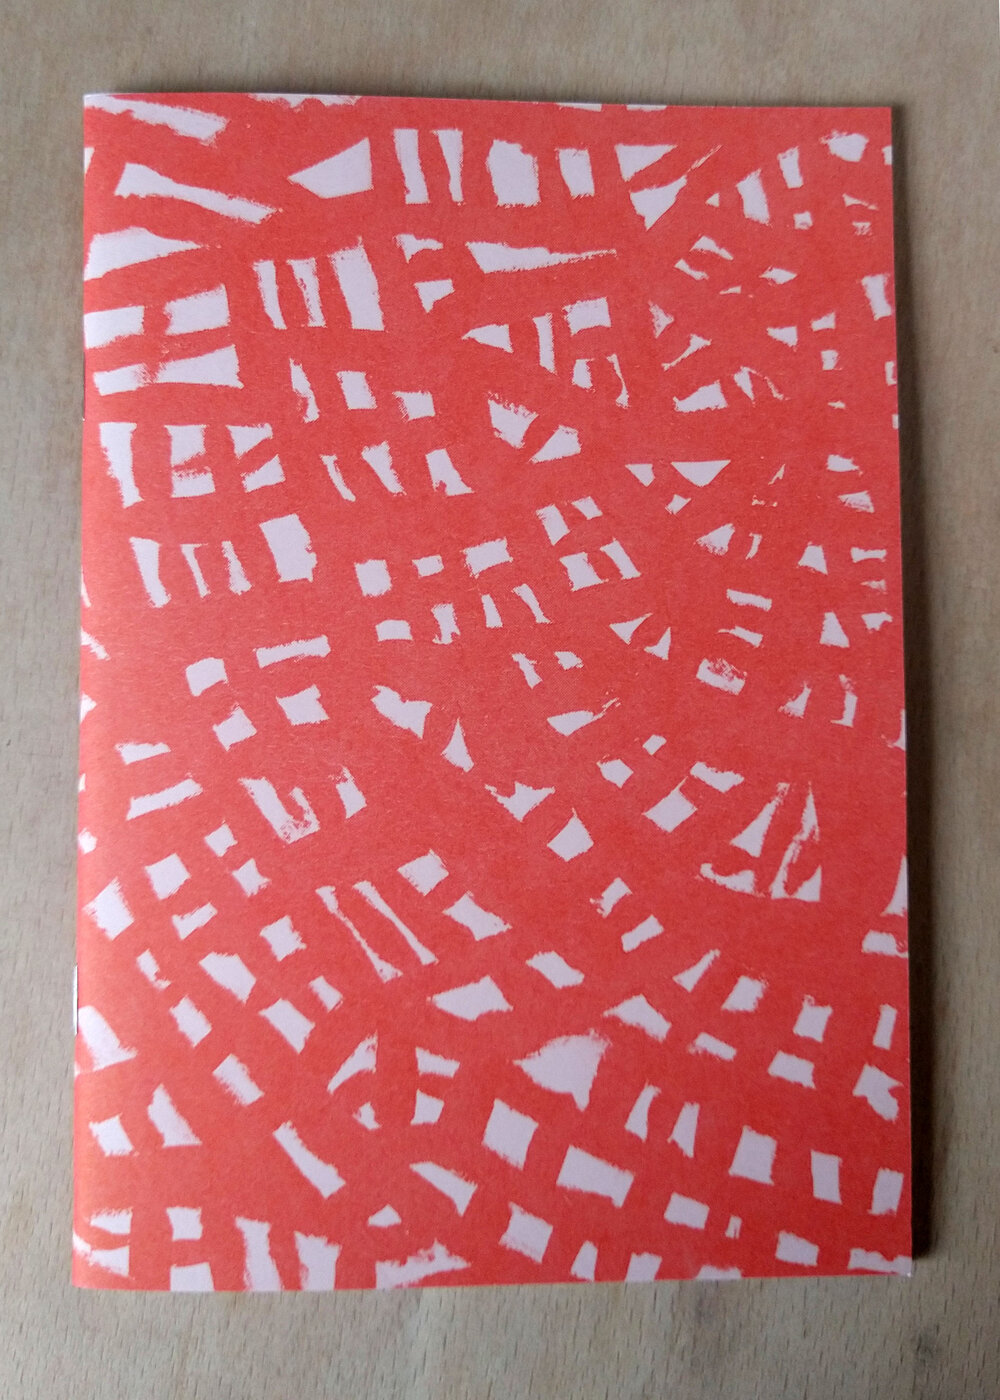 6 Pack of Riso Printed A5 Notebooks